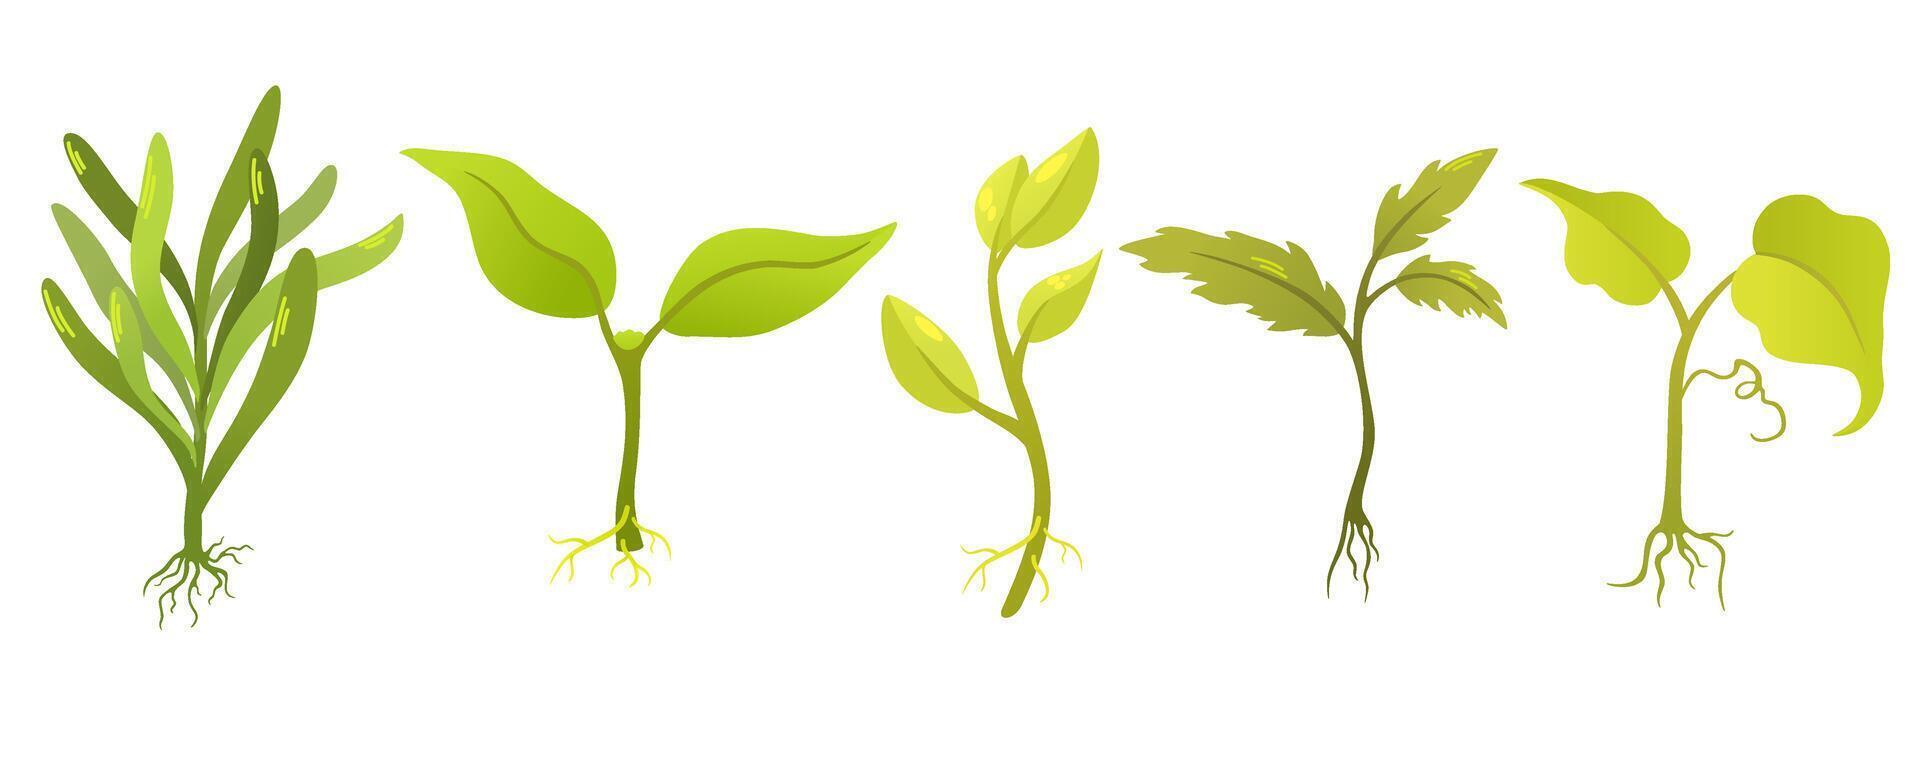 Plant sprouts. Seedling gardening plant. Seeds sprout in ground. Sprout, plant, tree growing agriculture icons. Vector hand draw flat illustration isolated on white background.